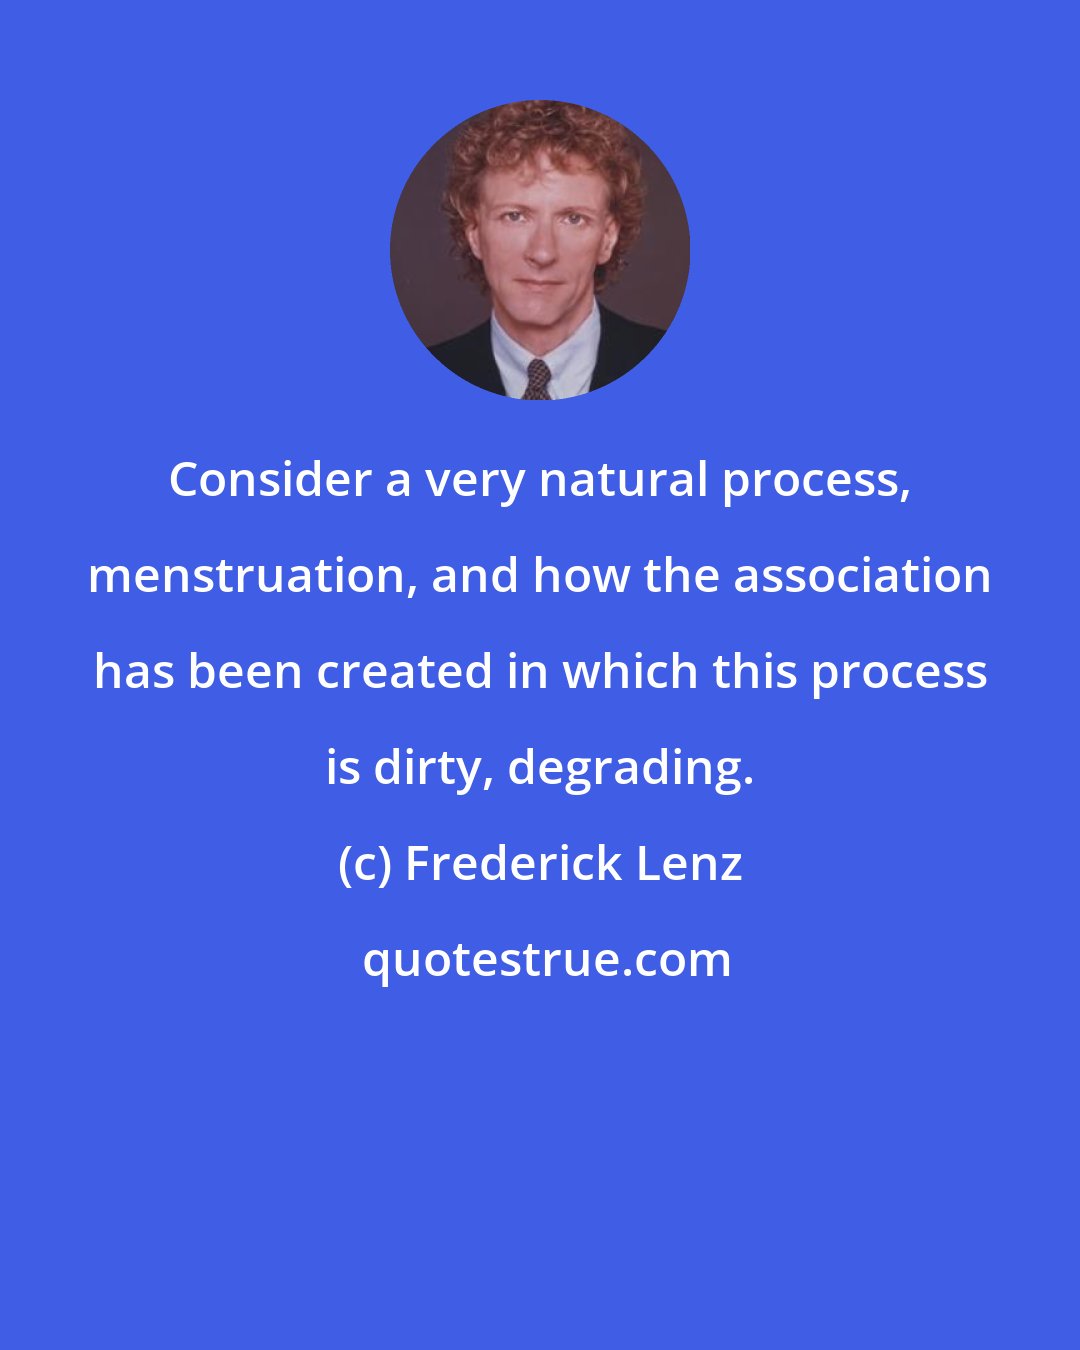 Frederick Lenz: Consider a very natural process, menstruation, and how the association has been created in which this process is dirty, degrading.